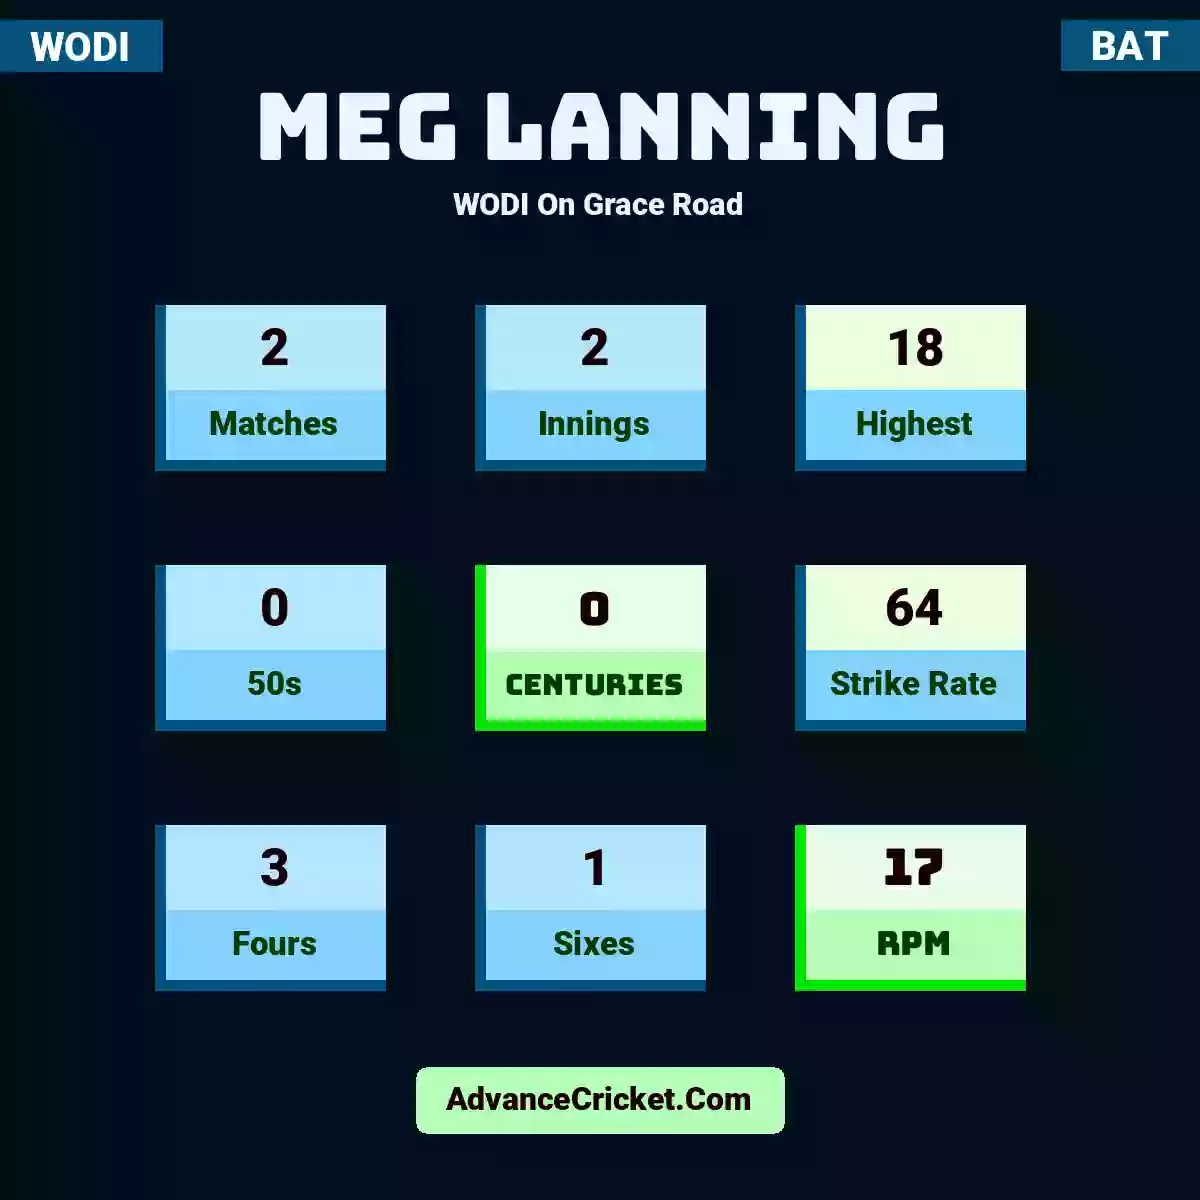 Meg Lanning WODI  On Grace Road, Meg Lanning played 2 matches, scored 18 runs as highest, 0 half-centuries, and 0 centuries, with a strike rate of 64. M.Lanning hit 3 fours and 1 sixes, with an RPM of 17.